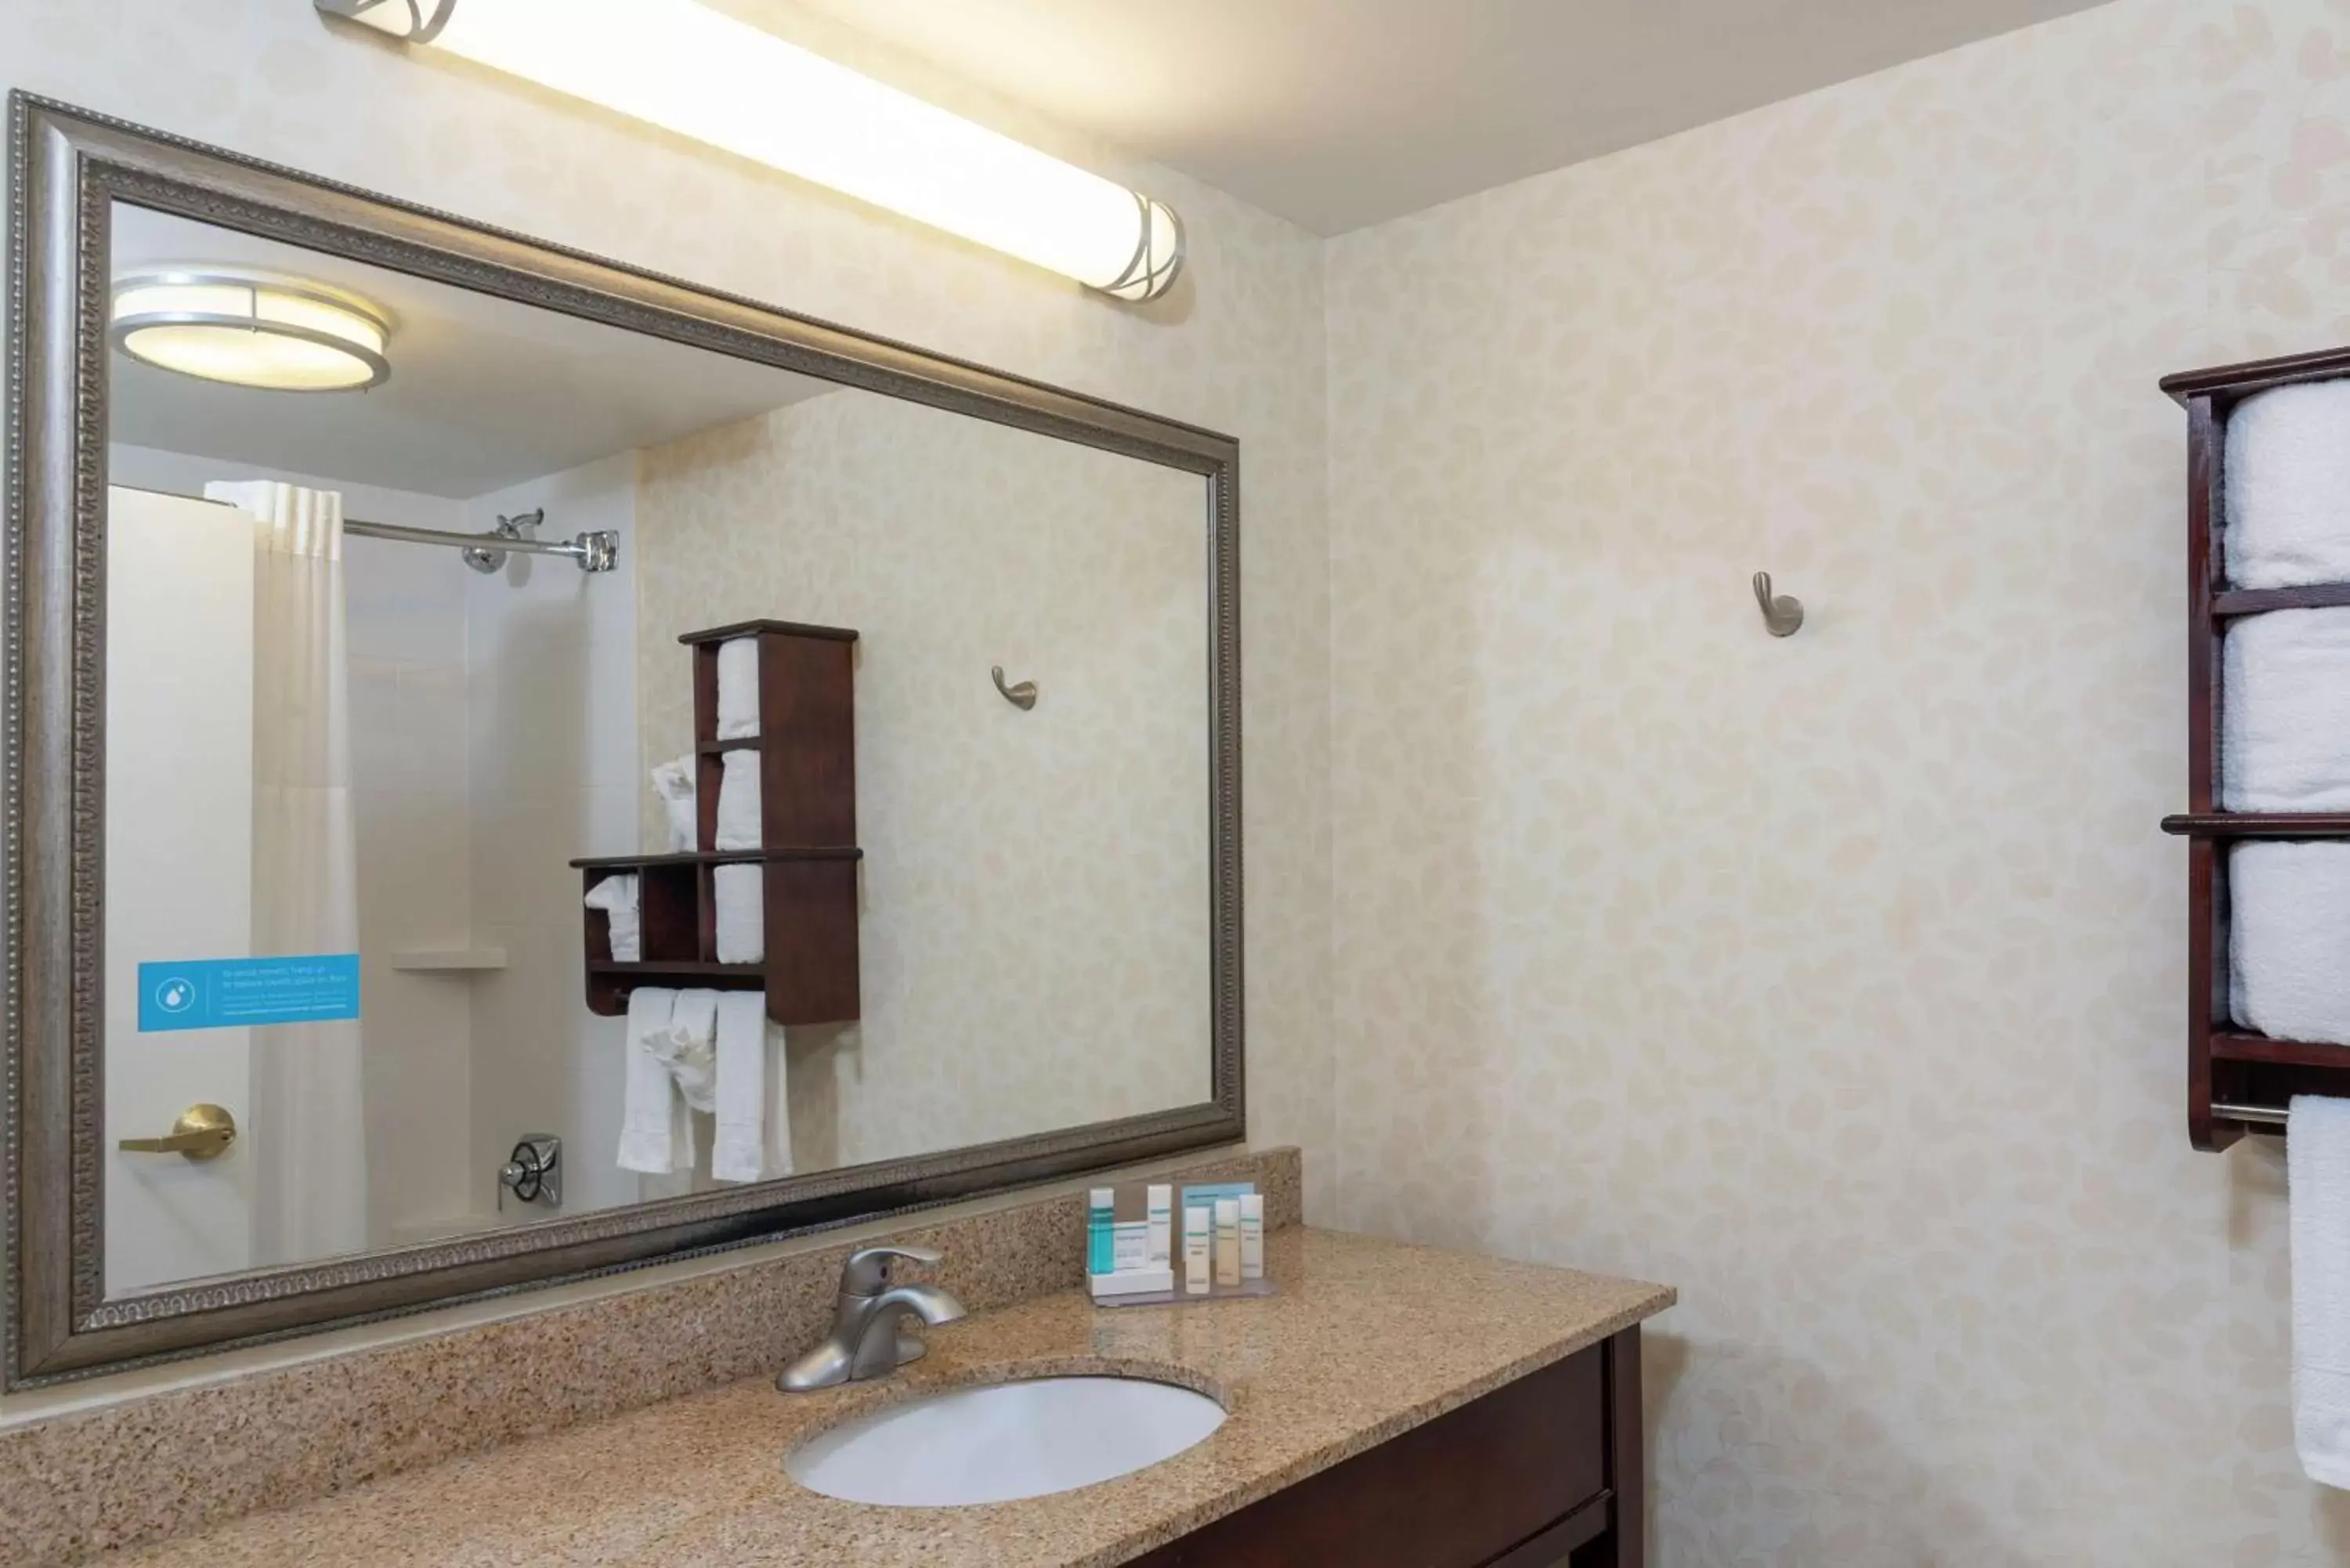 Bathroom in Hampton Inn Indianapolis Downtown Across from Circle Centre